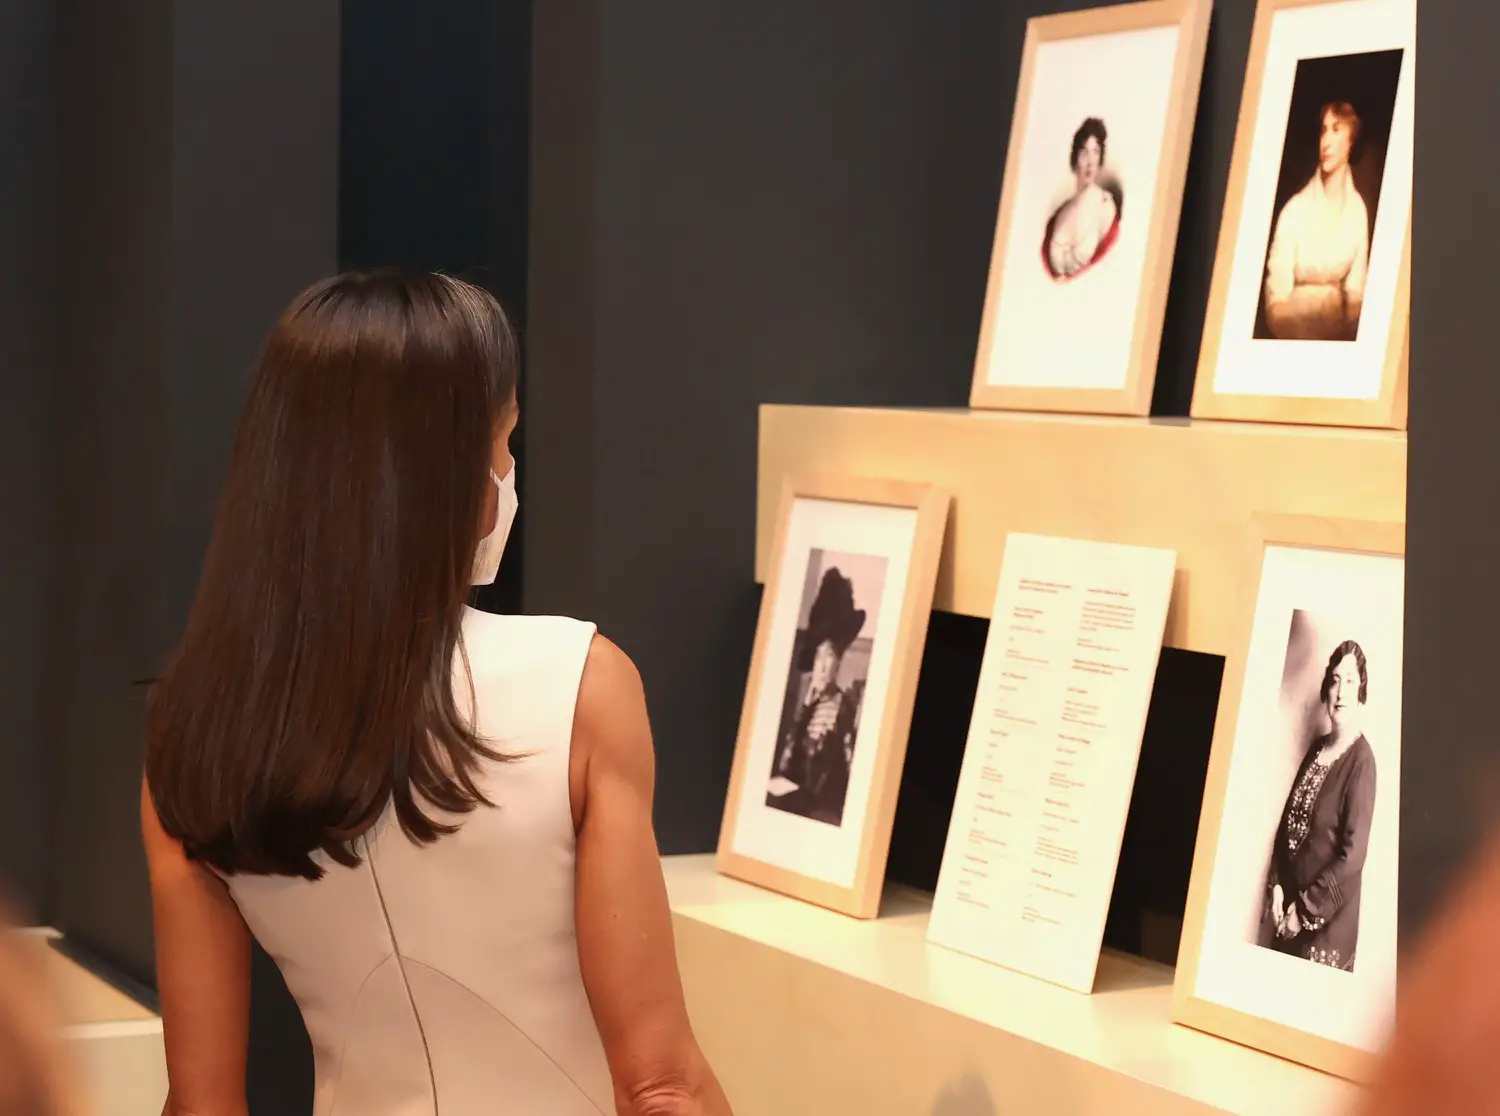 Queen Letizia inaugurated another artistic exhibition in Madrid